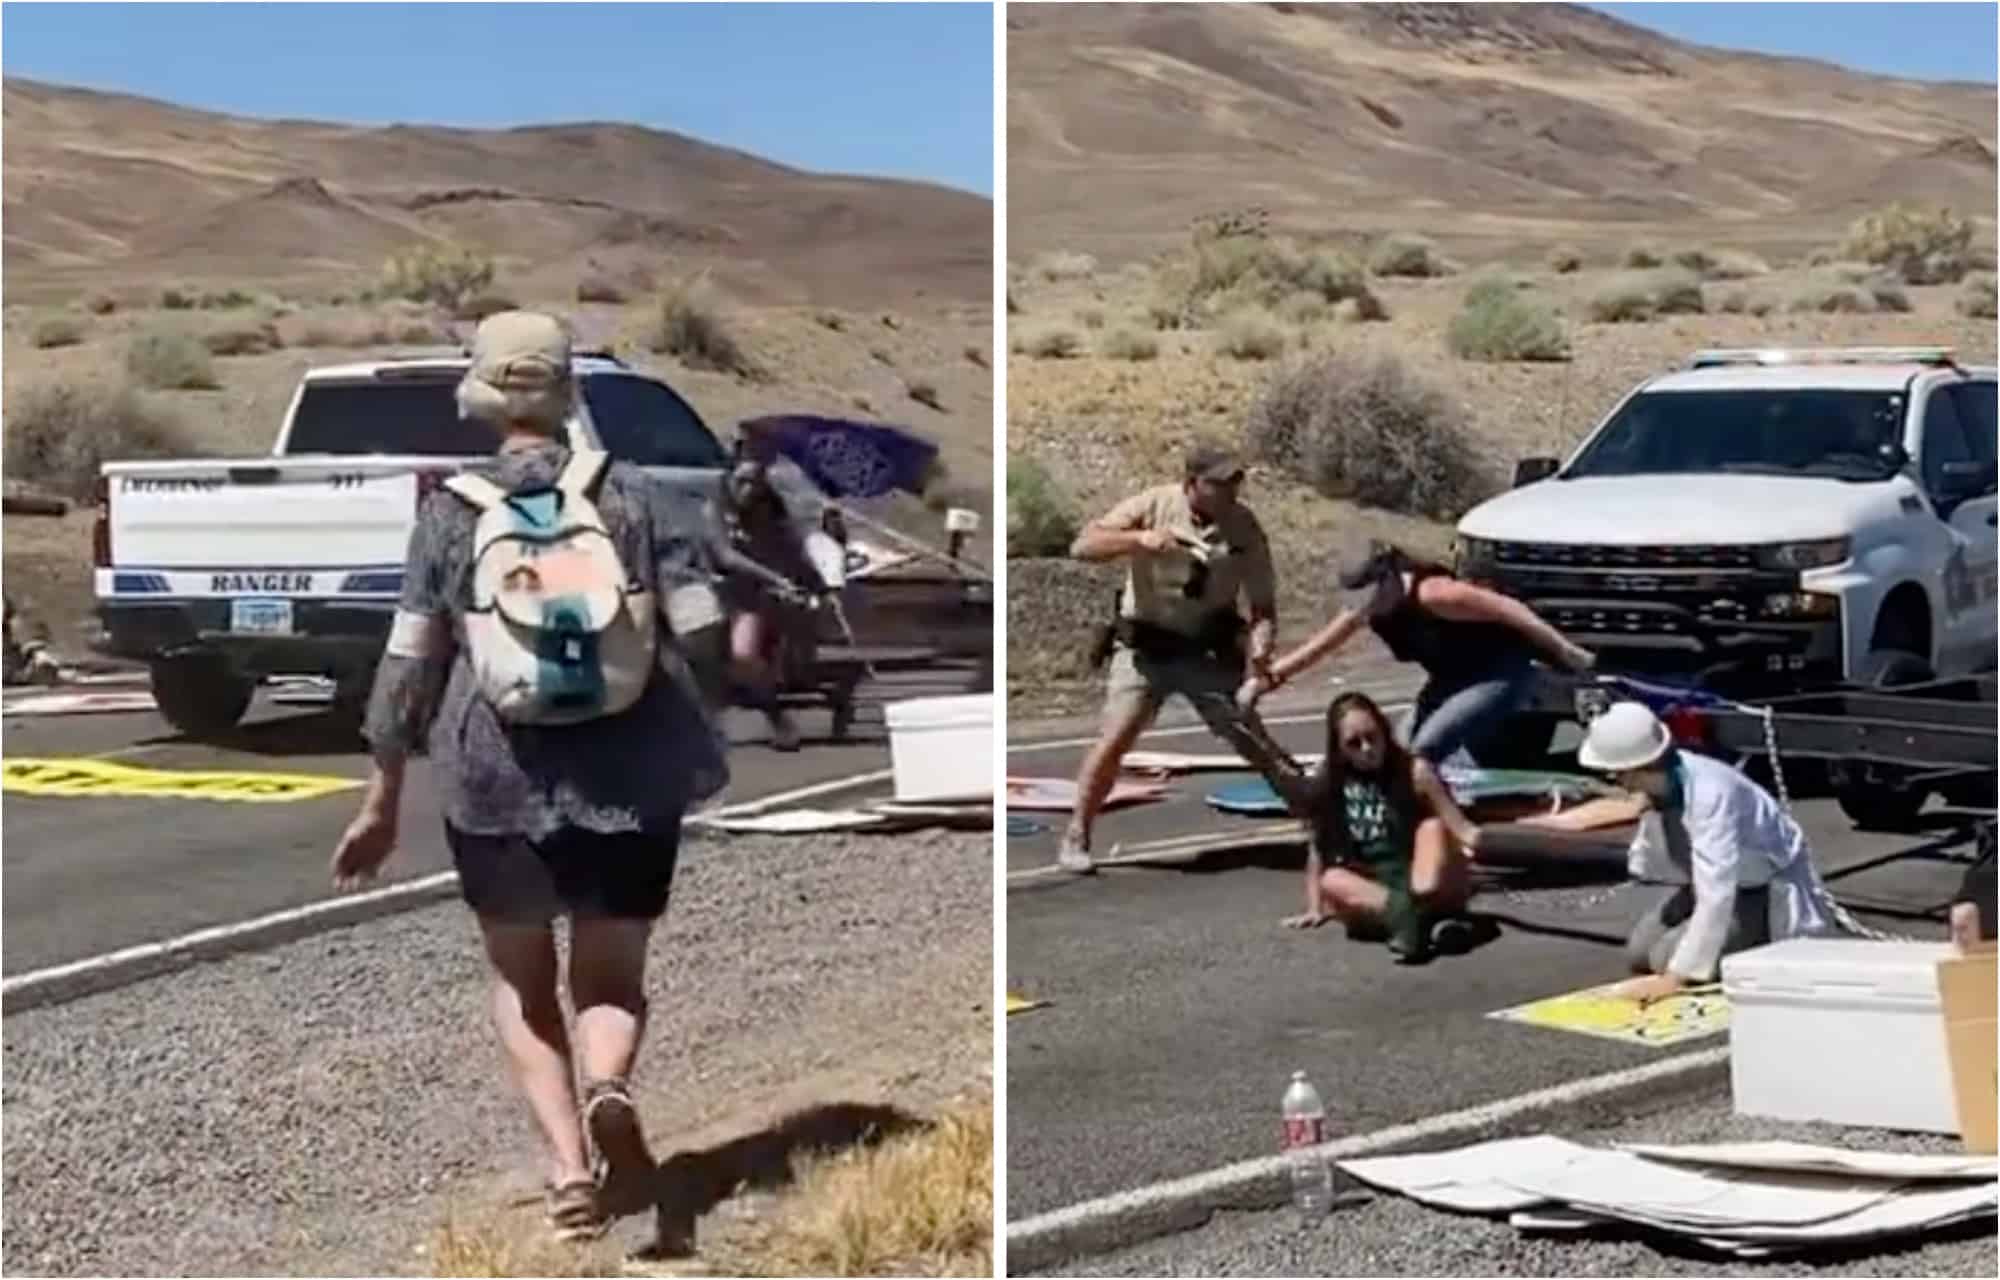 Police wield guns and ram into climate protesters in Nevada